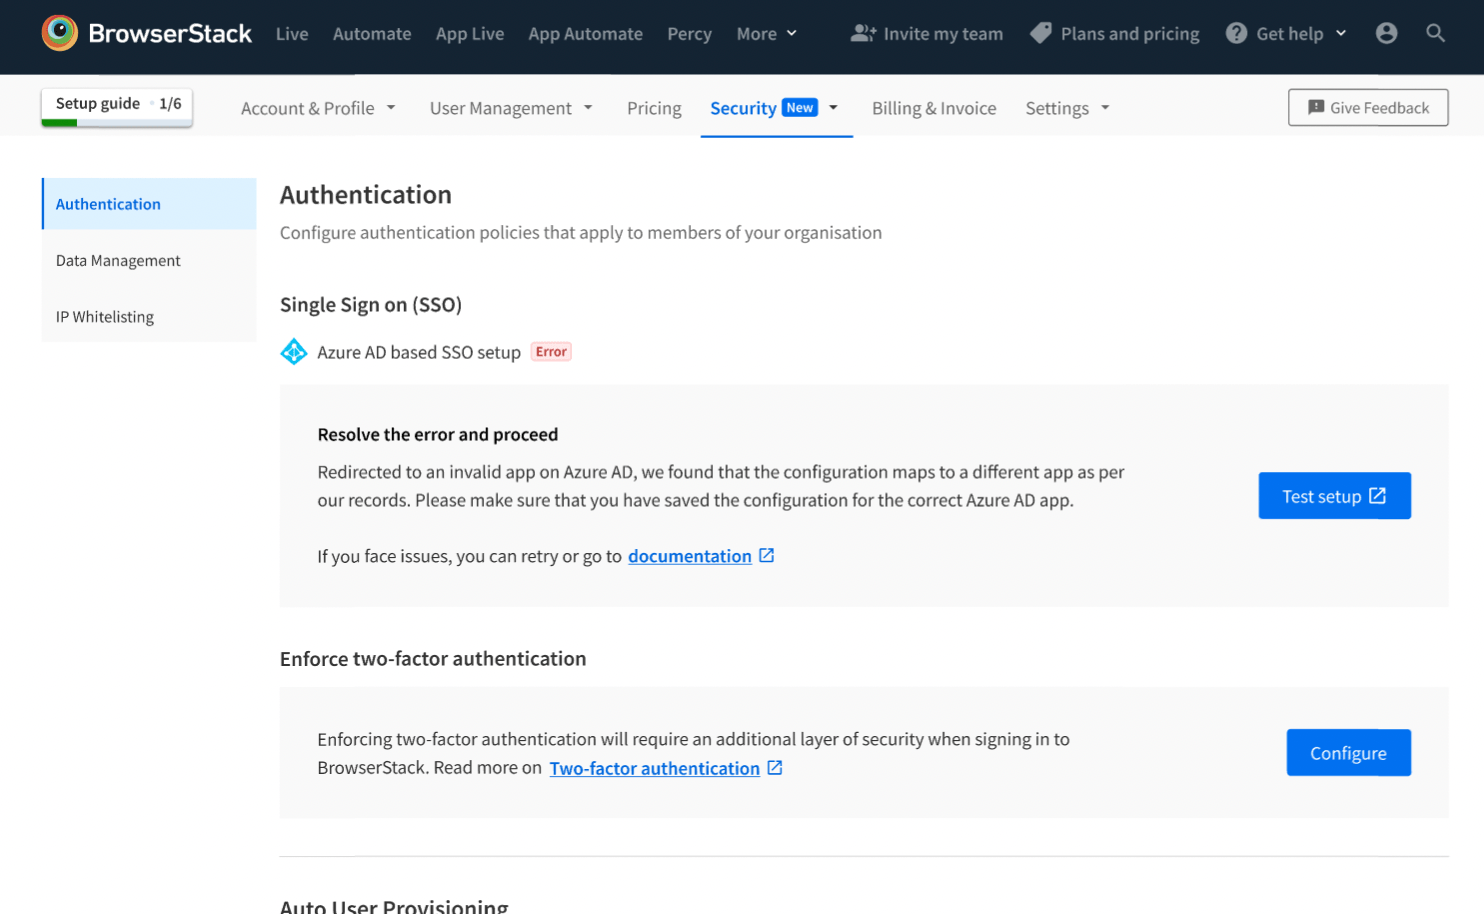 The user saved the configuration of the connection on the other application. Please make sure that the correct configuration is saved on the Azure AD app